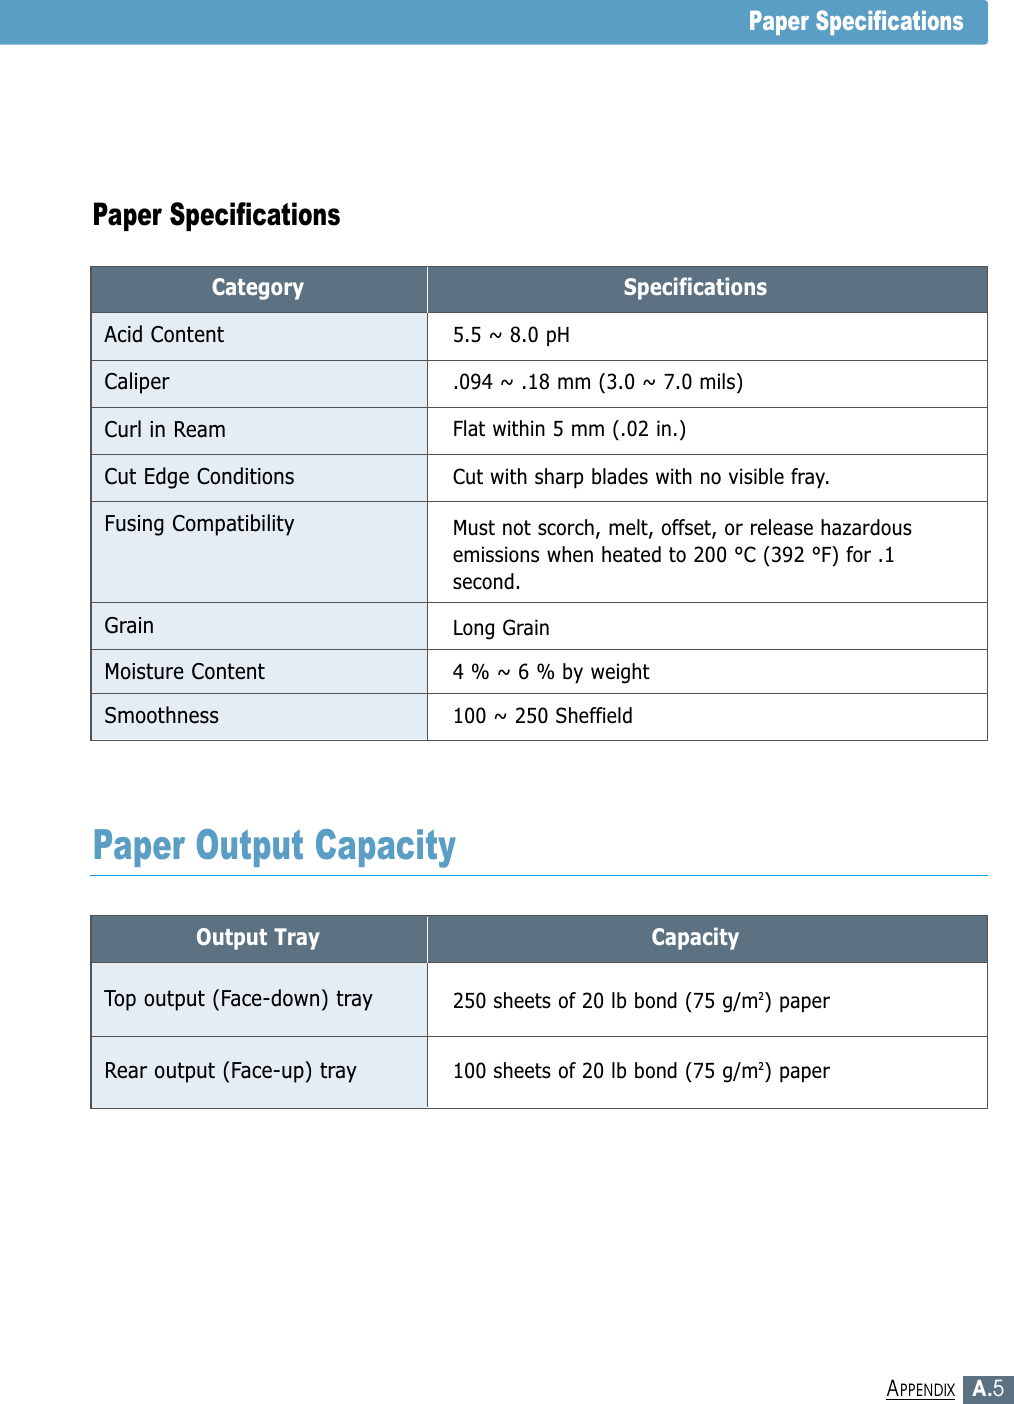 A.5APPENDIXPaper SpecificationsCategoryAcid ContentSpecifications5.5 ~ 8.0 pHCaliper.094 ~ .18 mm (3.0 ~ 7.0 mils)Curl in ReamCut Edge ConditionsFusing CompatibilityGrainFlat within 5 mm (.02 in.)Cut  with  sharp  blades  with  no  visible  fray.Moisture Content4 % ~ 6 % by weightSmoothness100 ~ 250 SheffieldMust not scorch, melt, offset, or release hazardousemissions when heated to 200 °C (392 °F) for .1second.Long GrainPaper SpecificationsOutput TrayTop output (Face-down) trayCapacity250 sheets of 20 lb bond (75 g/m2) paperRear output (Face-up) tray100 sheets of 20 lb bond (75 g/m2) paperPaper Output Capacity